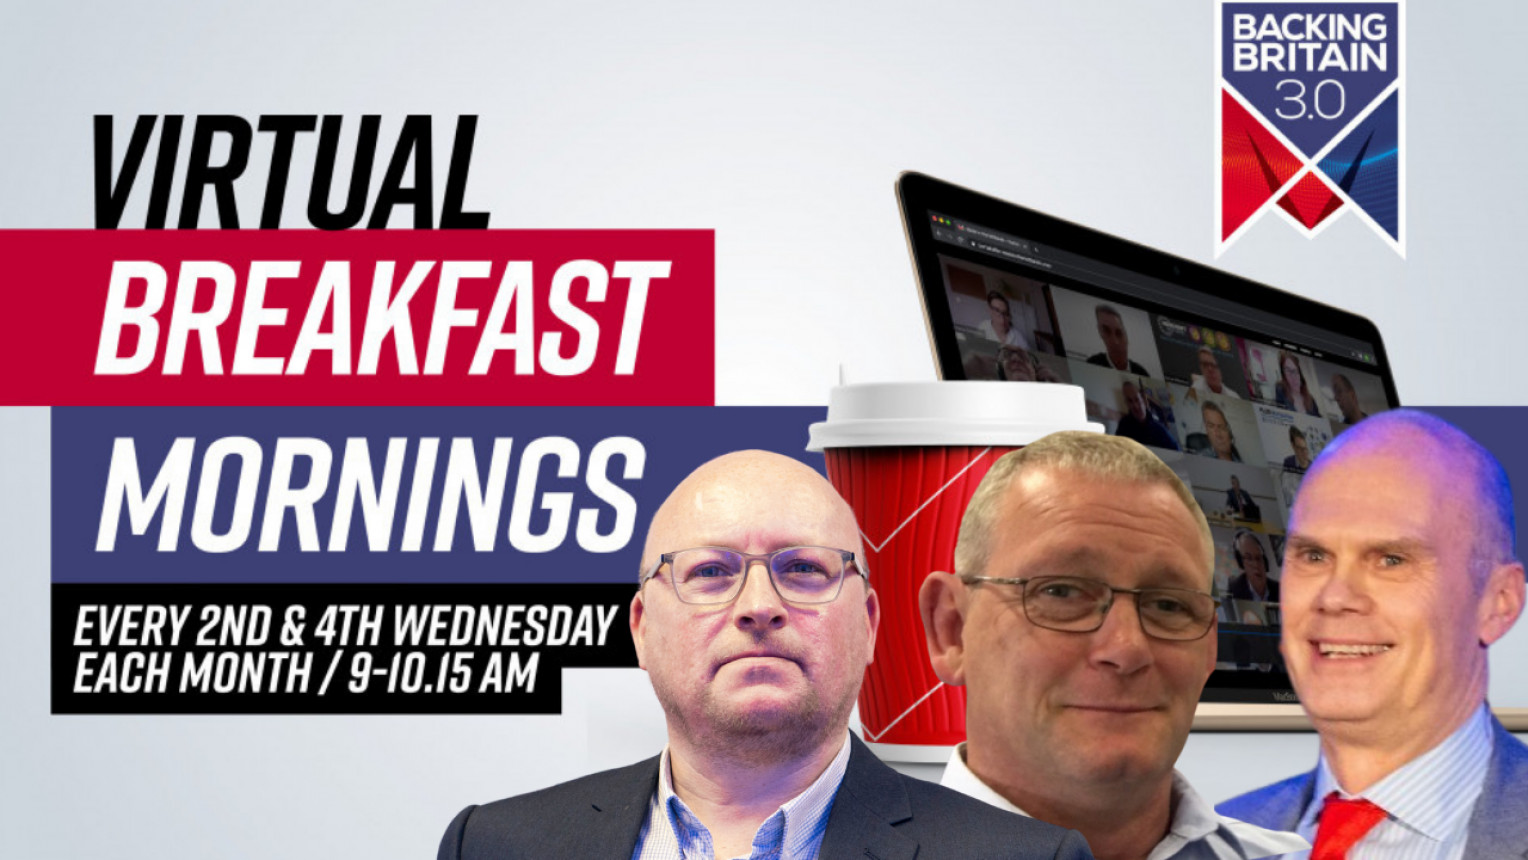 Backing Britain Virtual Breakfast Morning with Threeway Pressings (TWP), Allied Global Engineering and Hayley Group